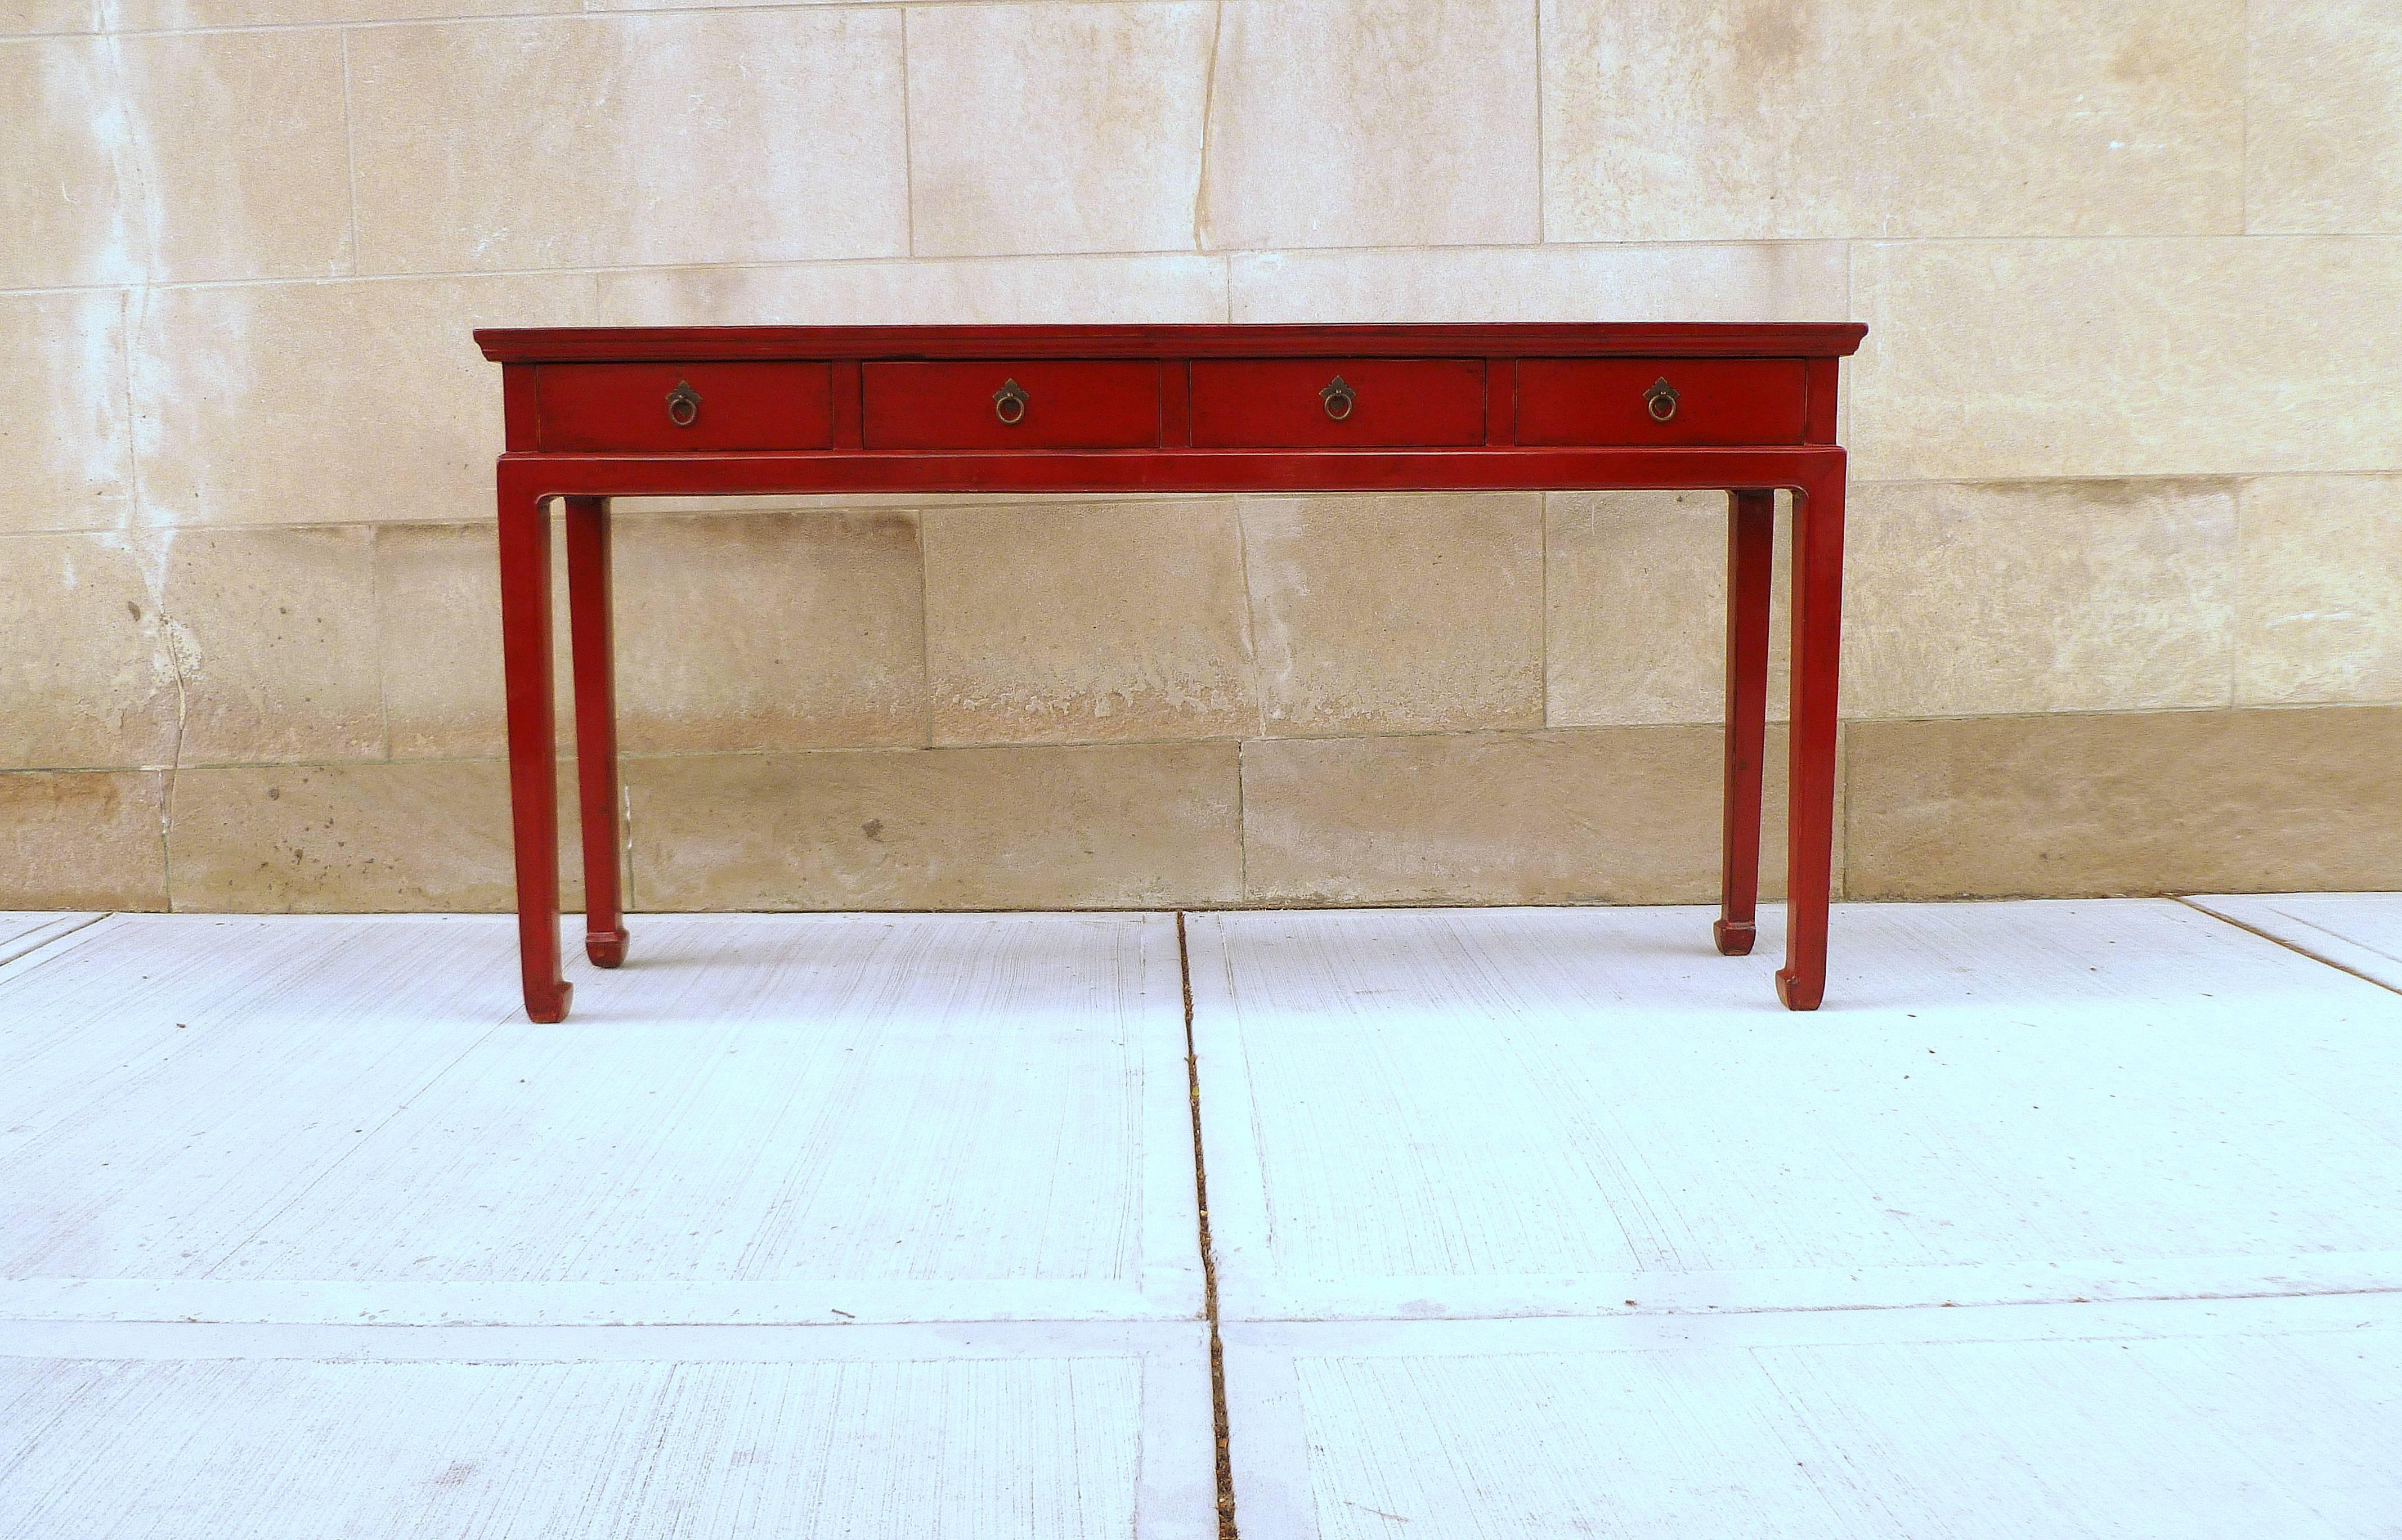 An elegant red lacquer console table with four drawers and brass fitting. We carry fine quality furniture with elegant finished and has been appeared many times in 